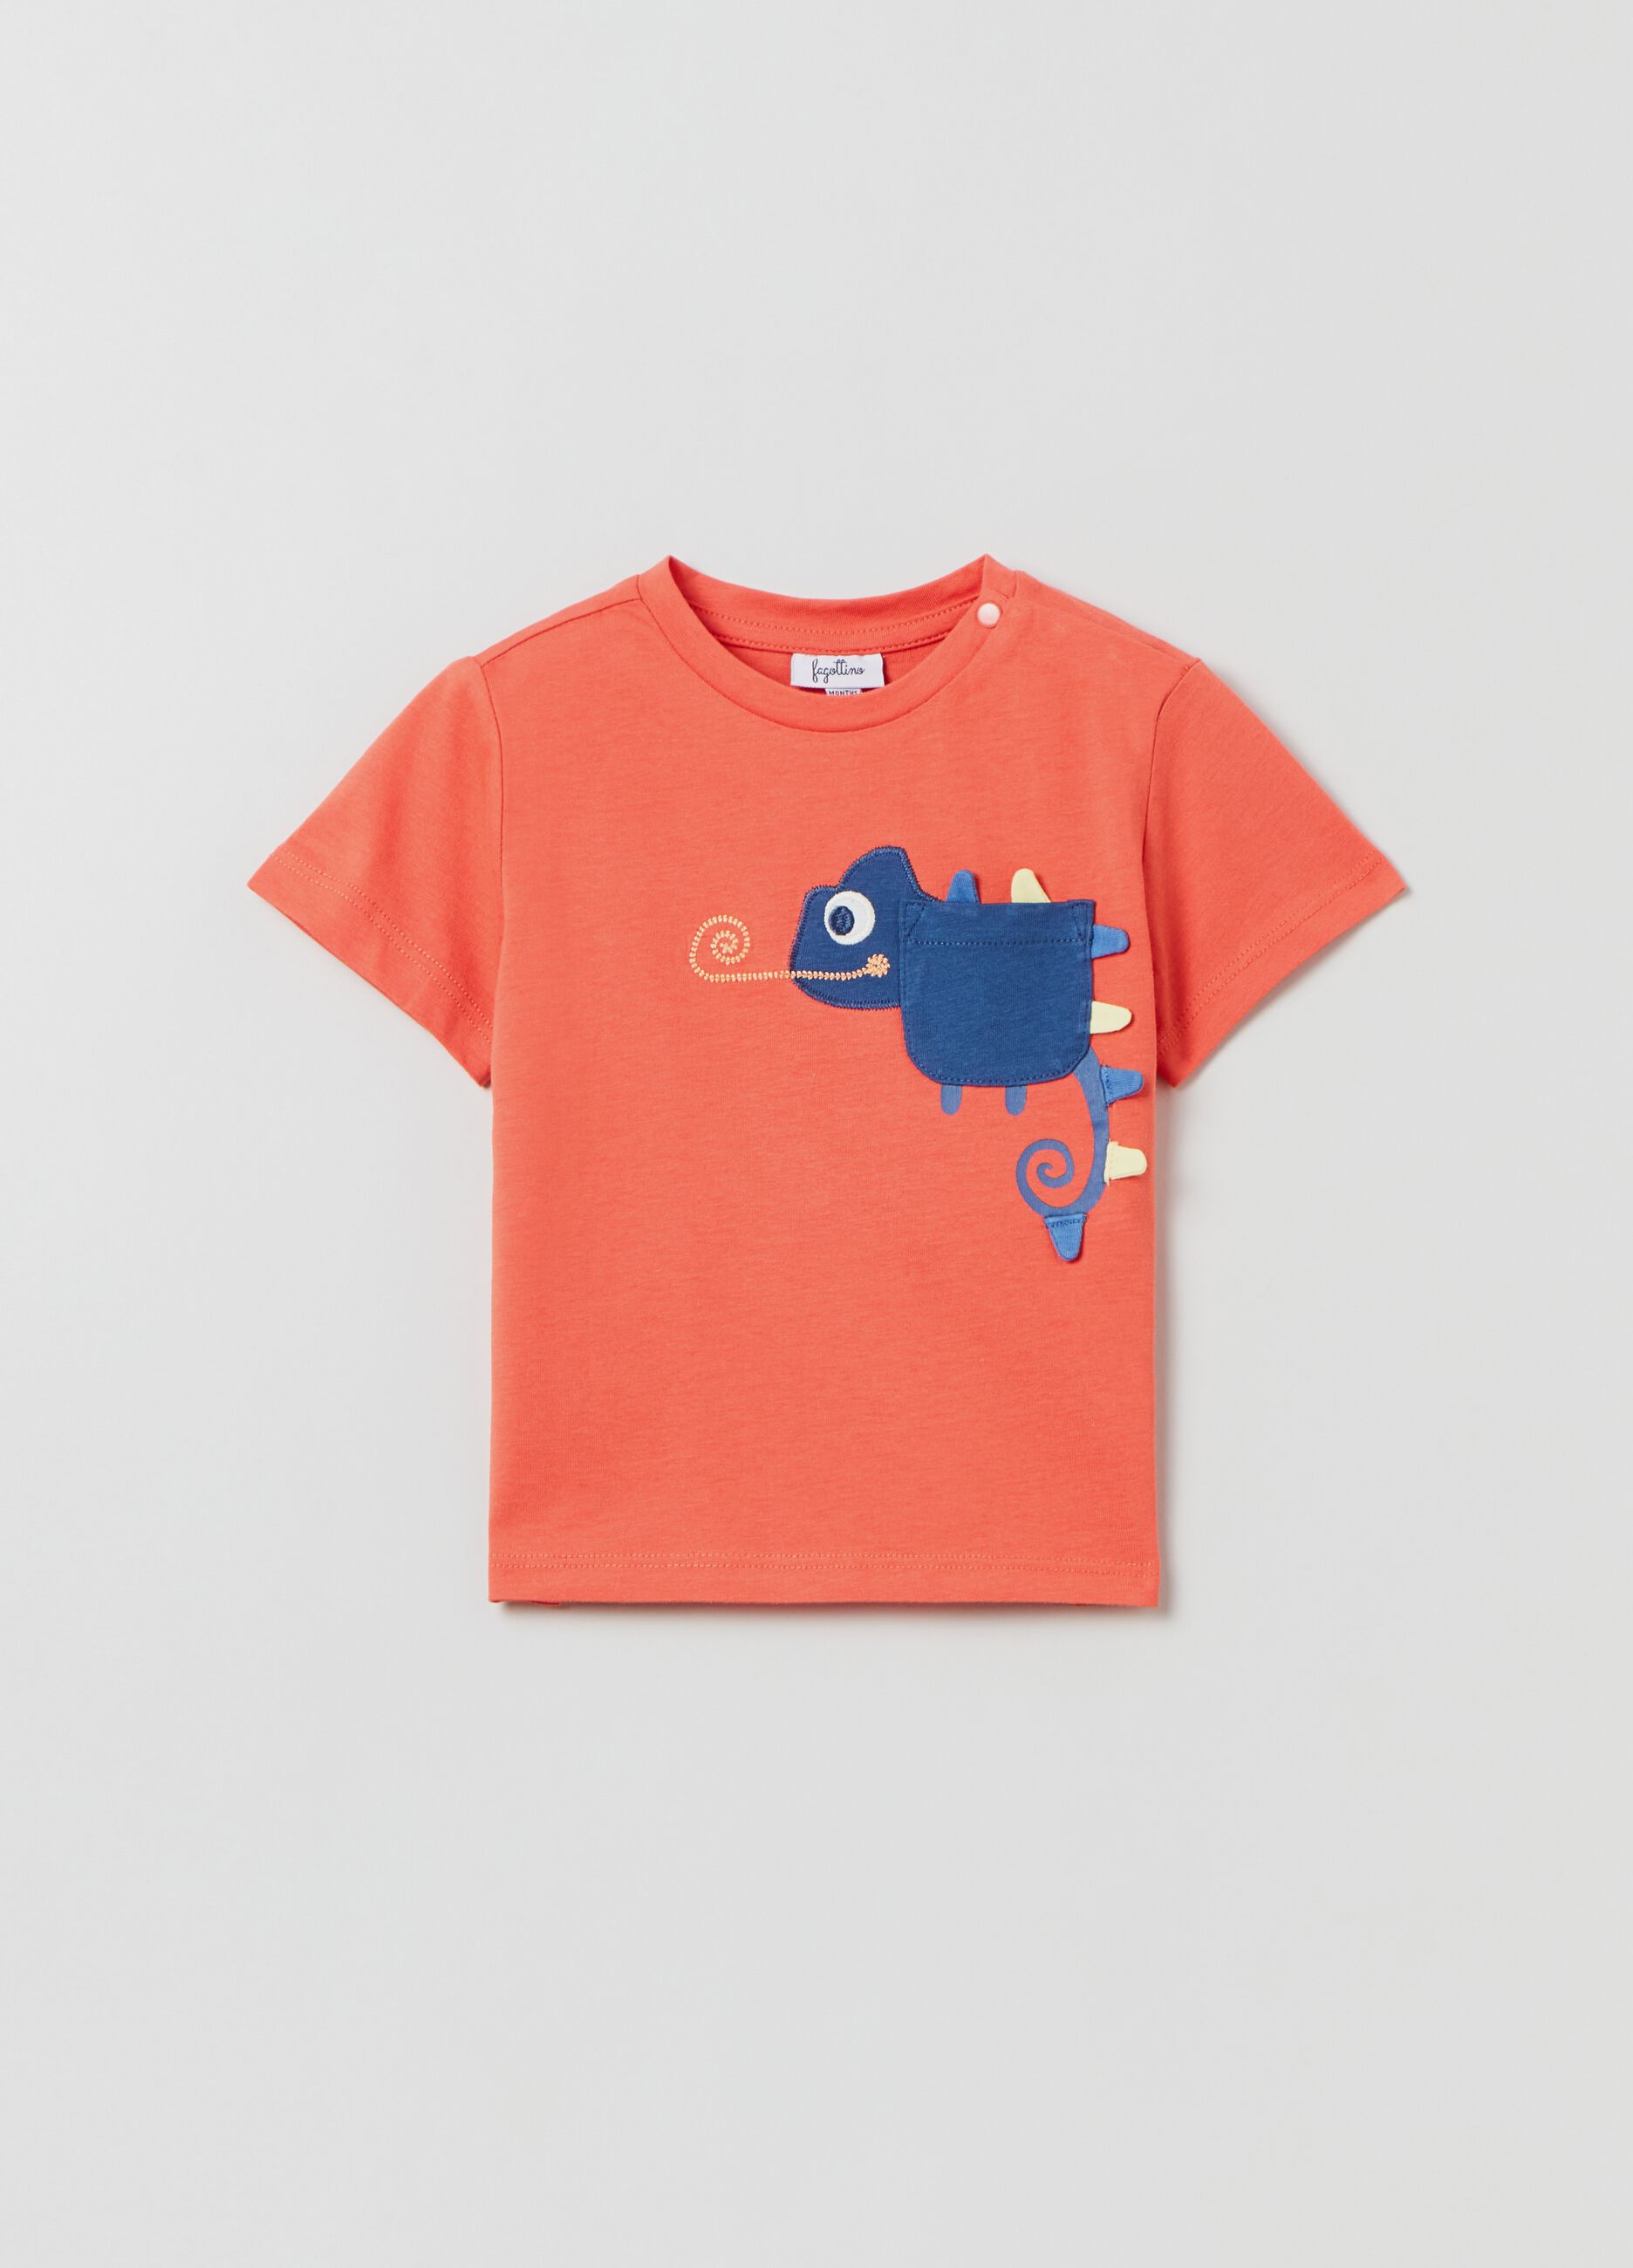 Cotton T-shirt with embroidered chameleon